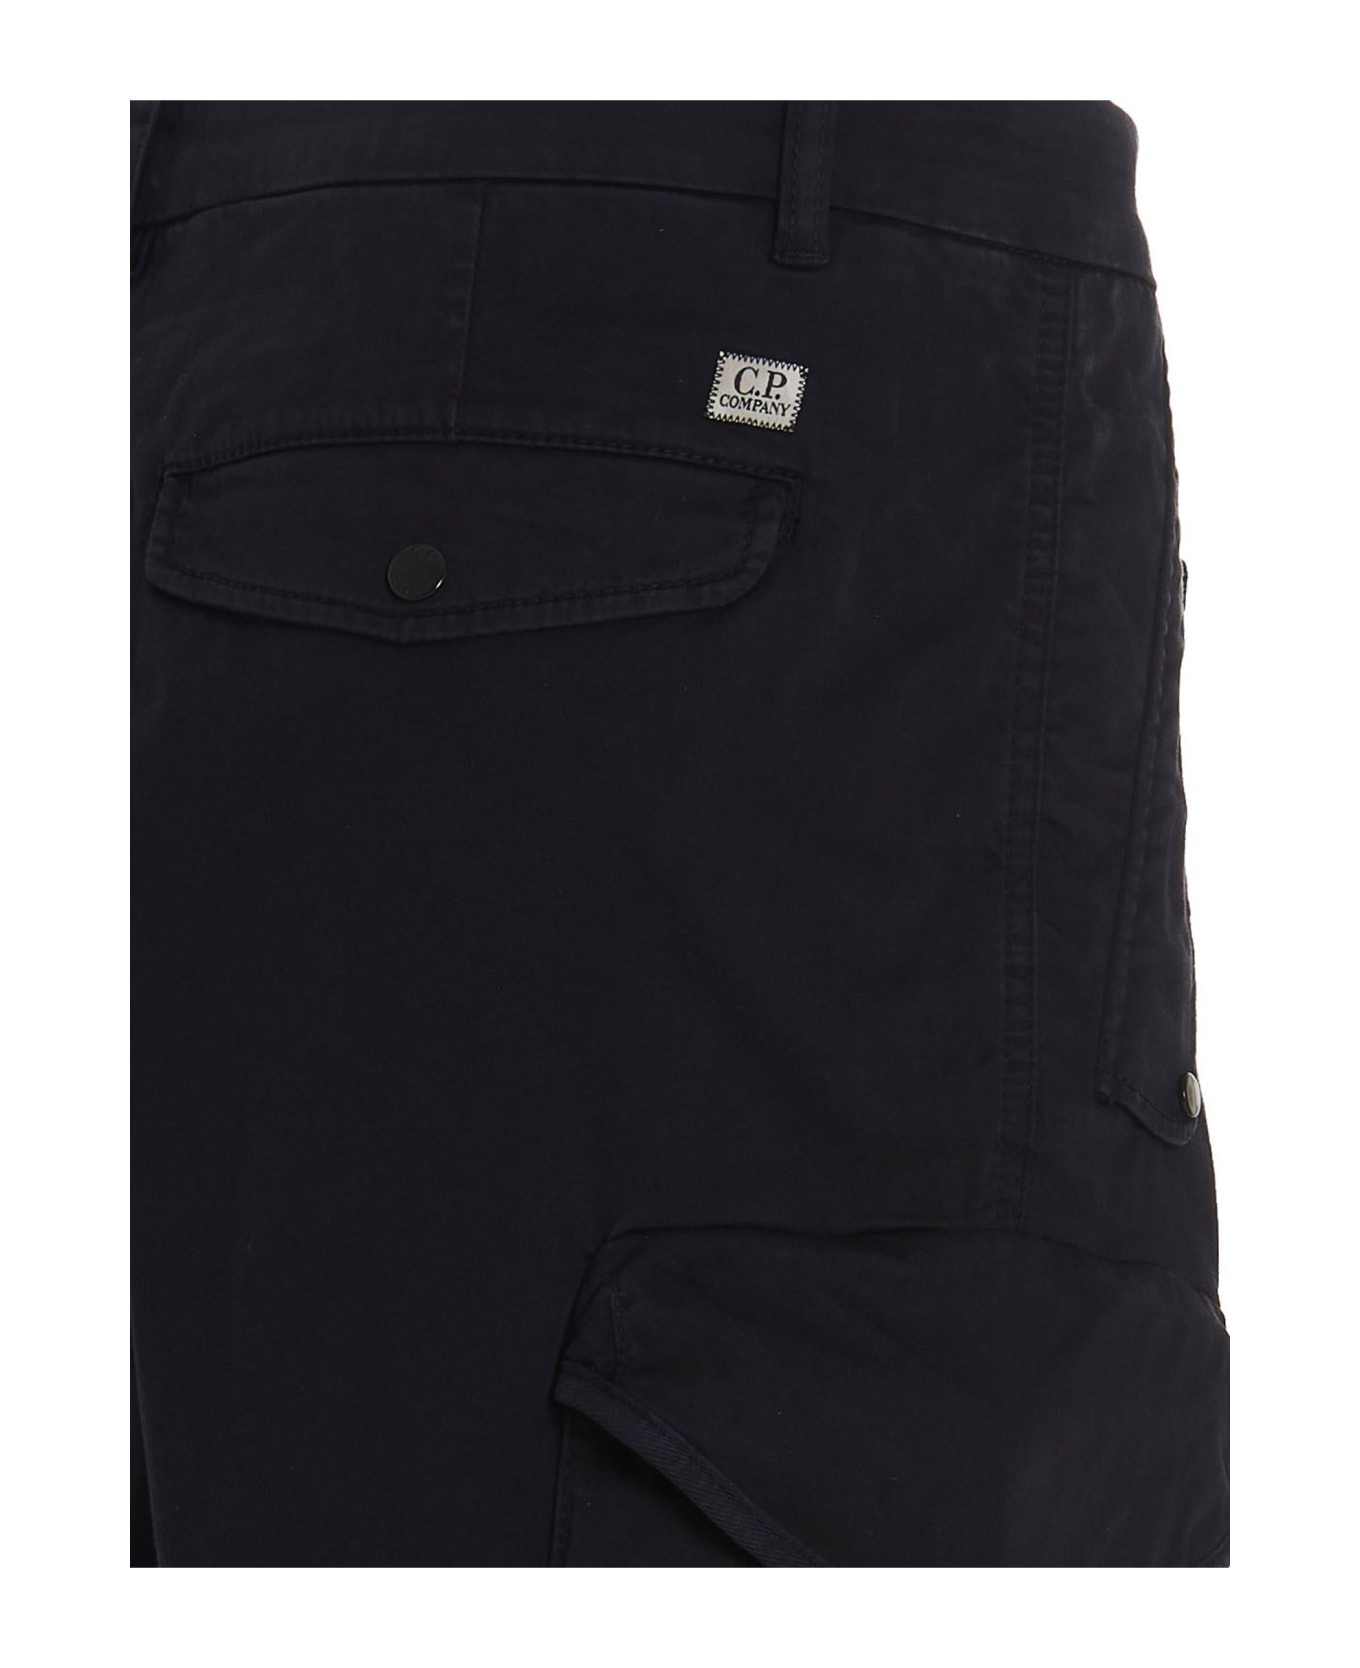 C.P. Company Cargo Trousers - Blue